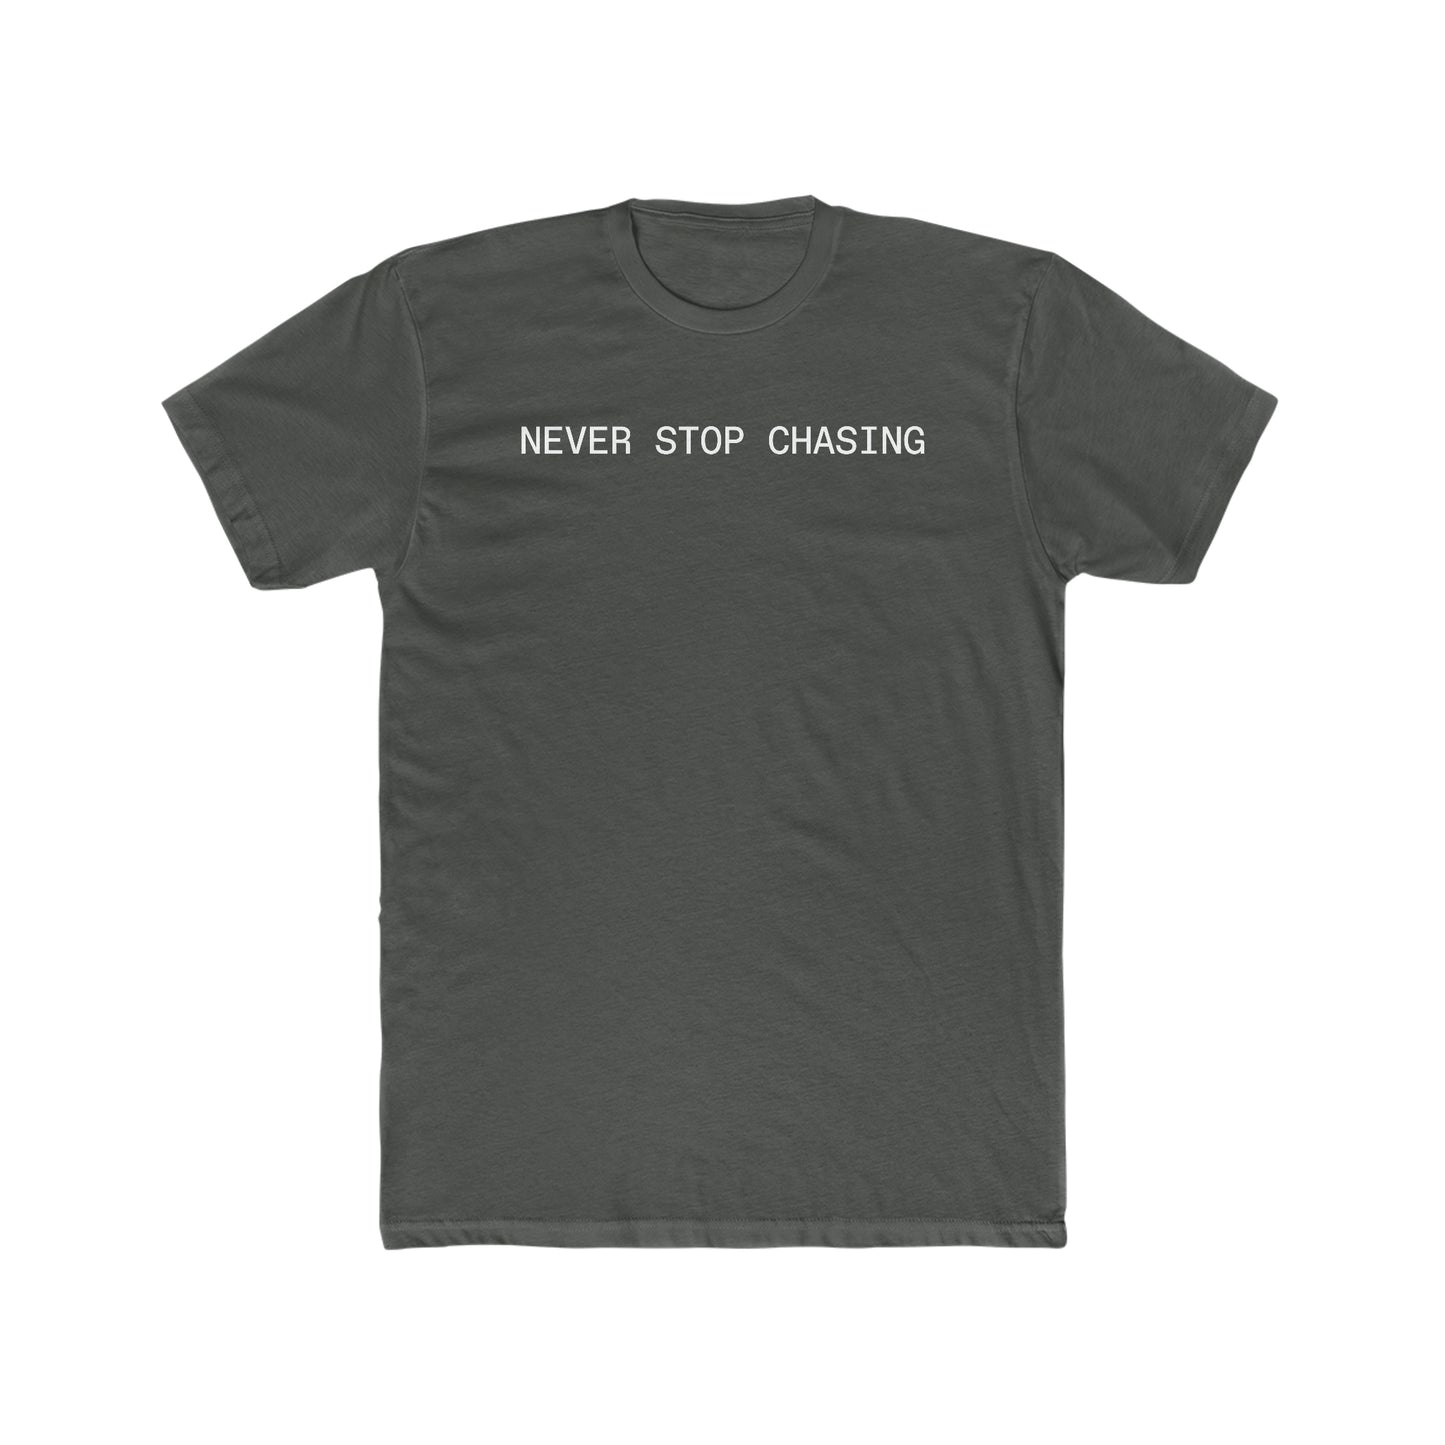 NEVER STOP CHASING NSC BACKED TEE - Never Stop Chasing